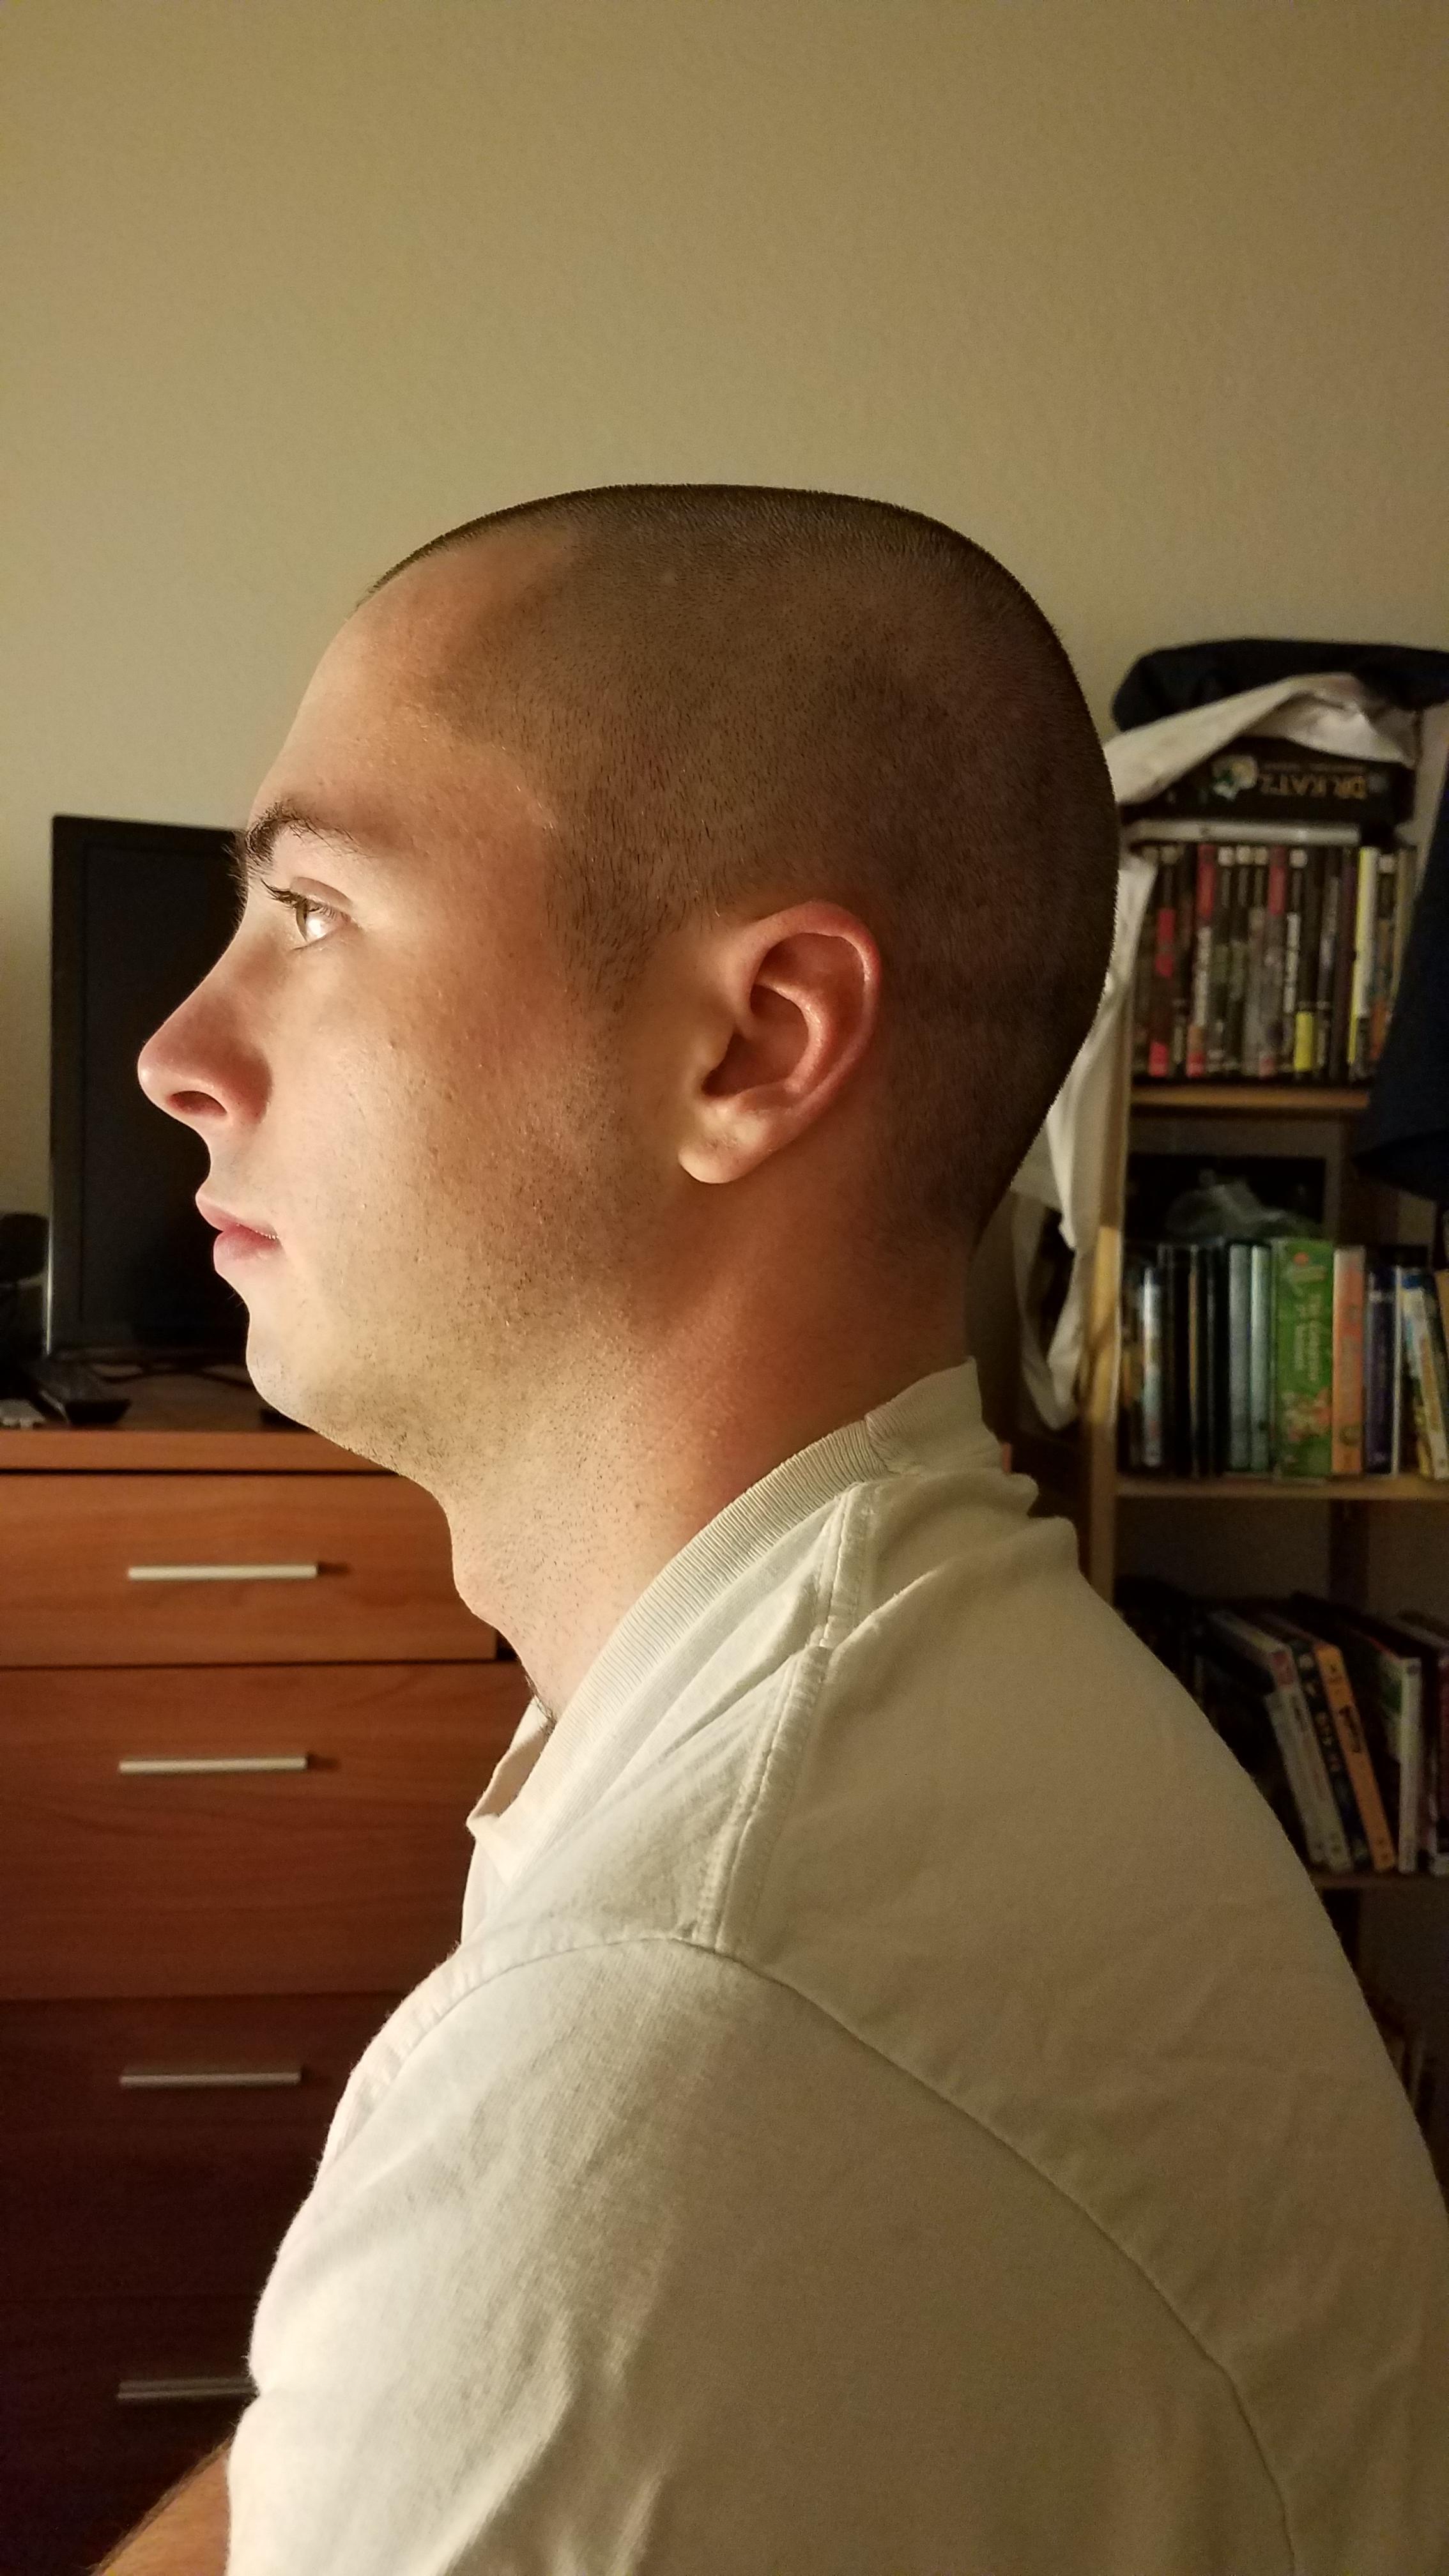 Shaved the fist time